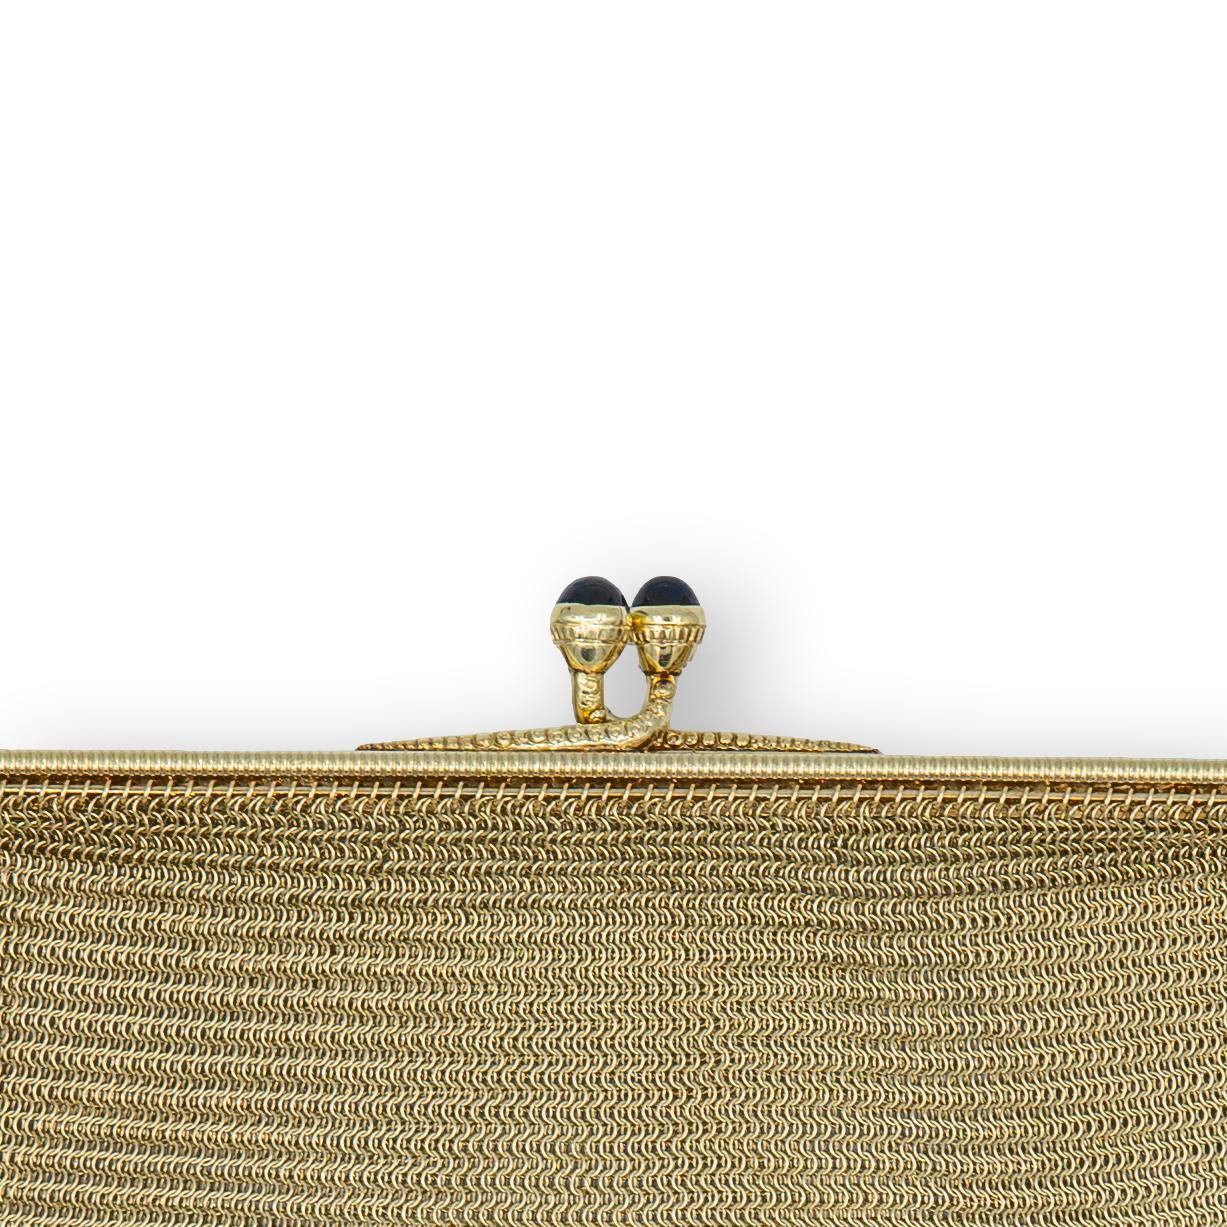 Ladies antique mesh purse from the early 20th century finely crafted in 14 karat yellow gold with a ball snap closure featuring 2 cabochon sapphires, the purse is hanging off a rope gold strap chain measuring 16